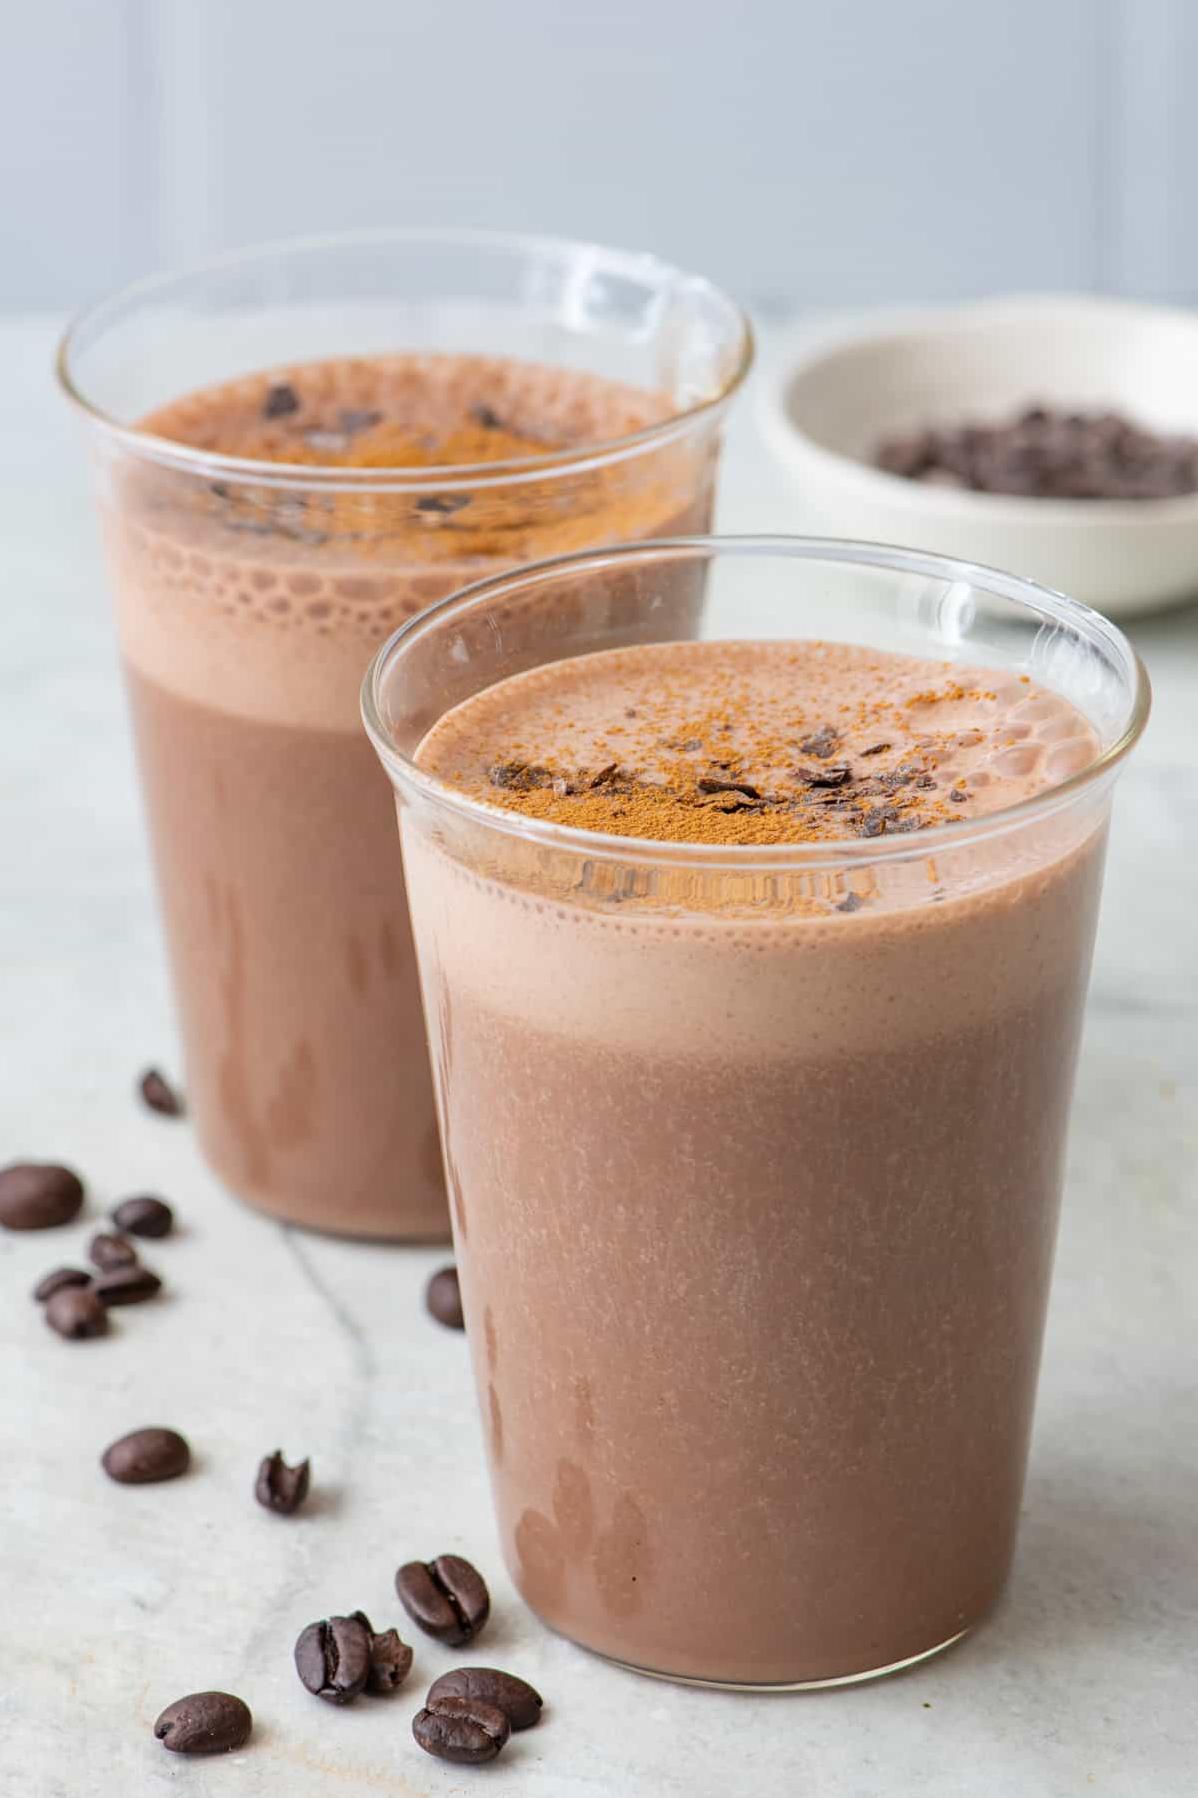  This Coffee Smoothie is giving us all the feels.